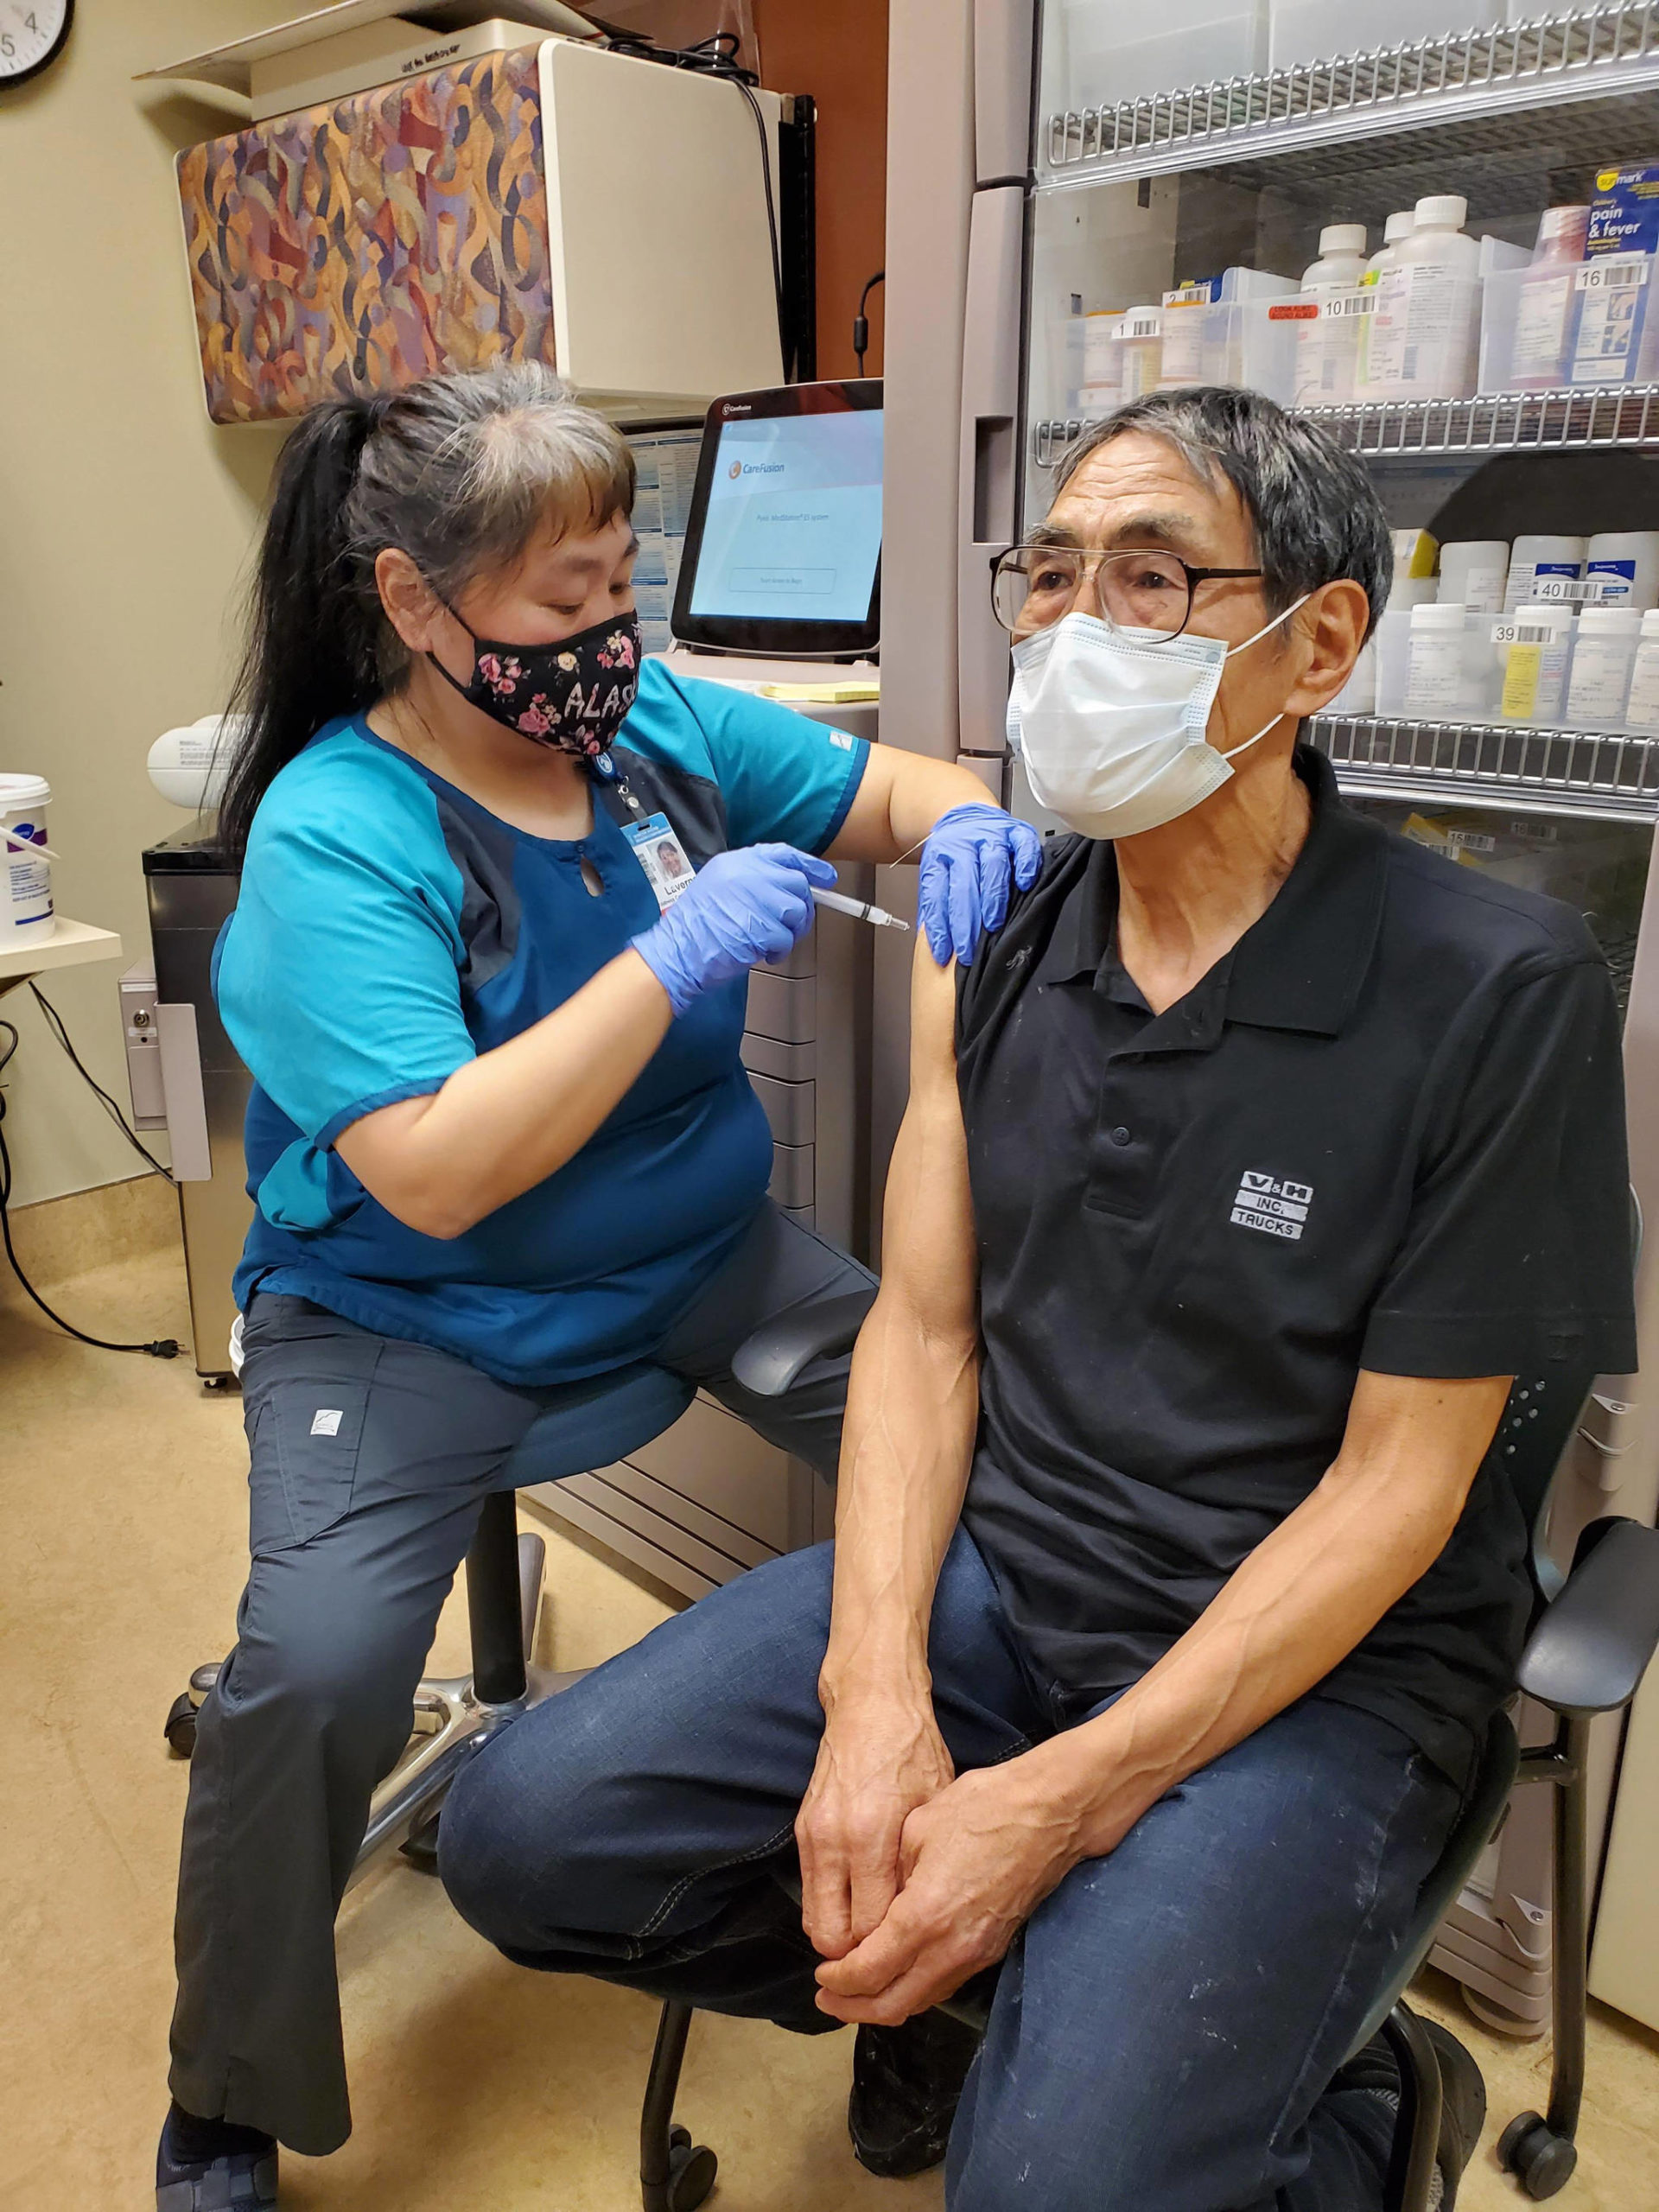 In this photo provided by Norton Sound Health Corp., is nurse LaVerne Saccheus providing a vaccination to Unalakleet elder Joseph “Nupid” Katchatag in Unalakleet, Alaska, on Dec. 23, 2020. Alaska’s highest vaccination rates among those 16 or older have been in some of its remotest, hardest-to-access communities, where the toll of past flu or tuberculosis outbreaks hasn’t been forgotten. (Carol Charles / Norton Sound Health Corp.)